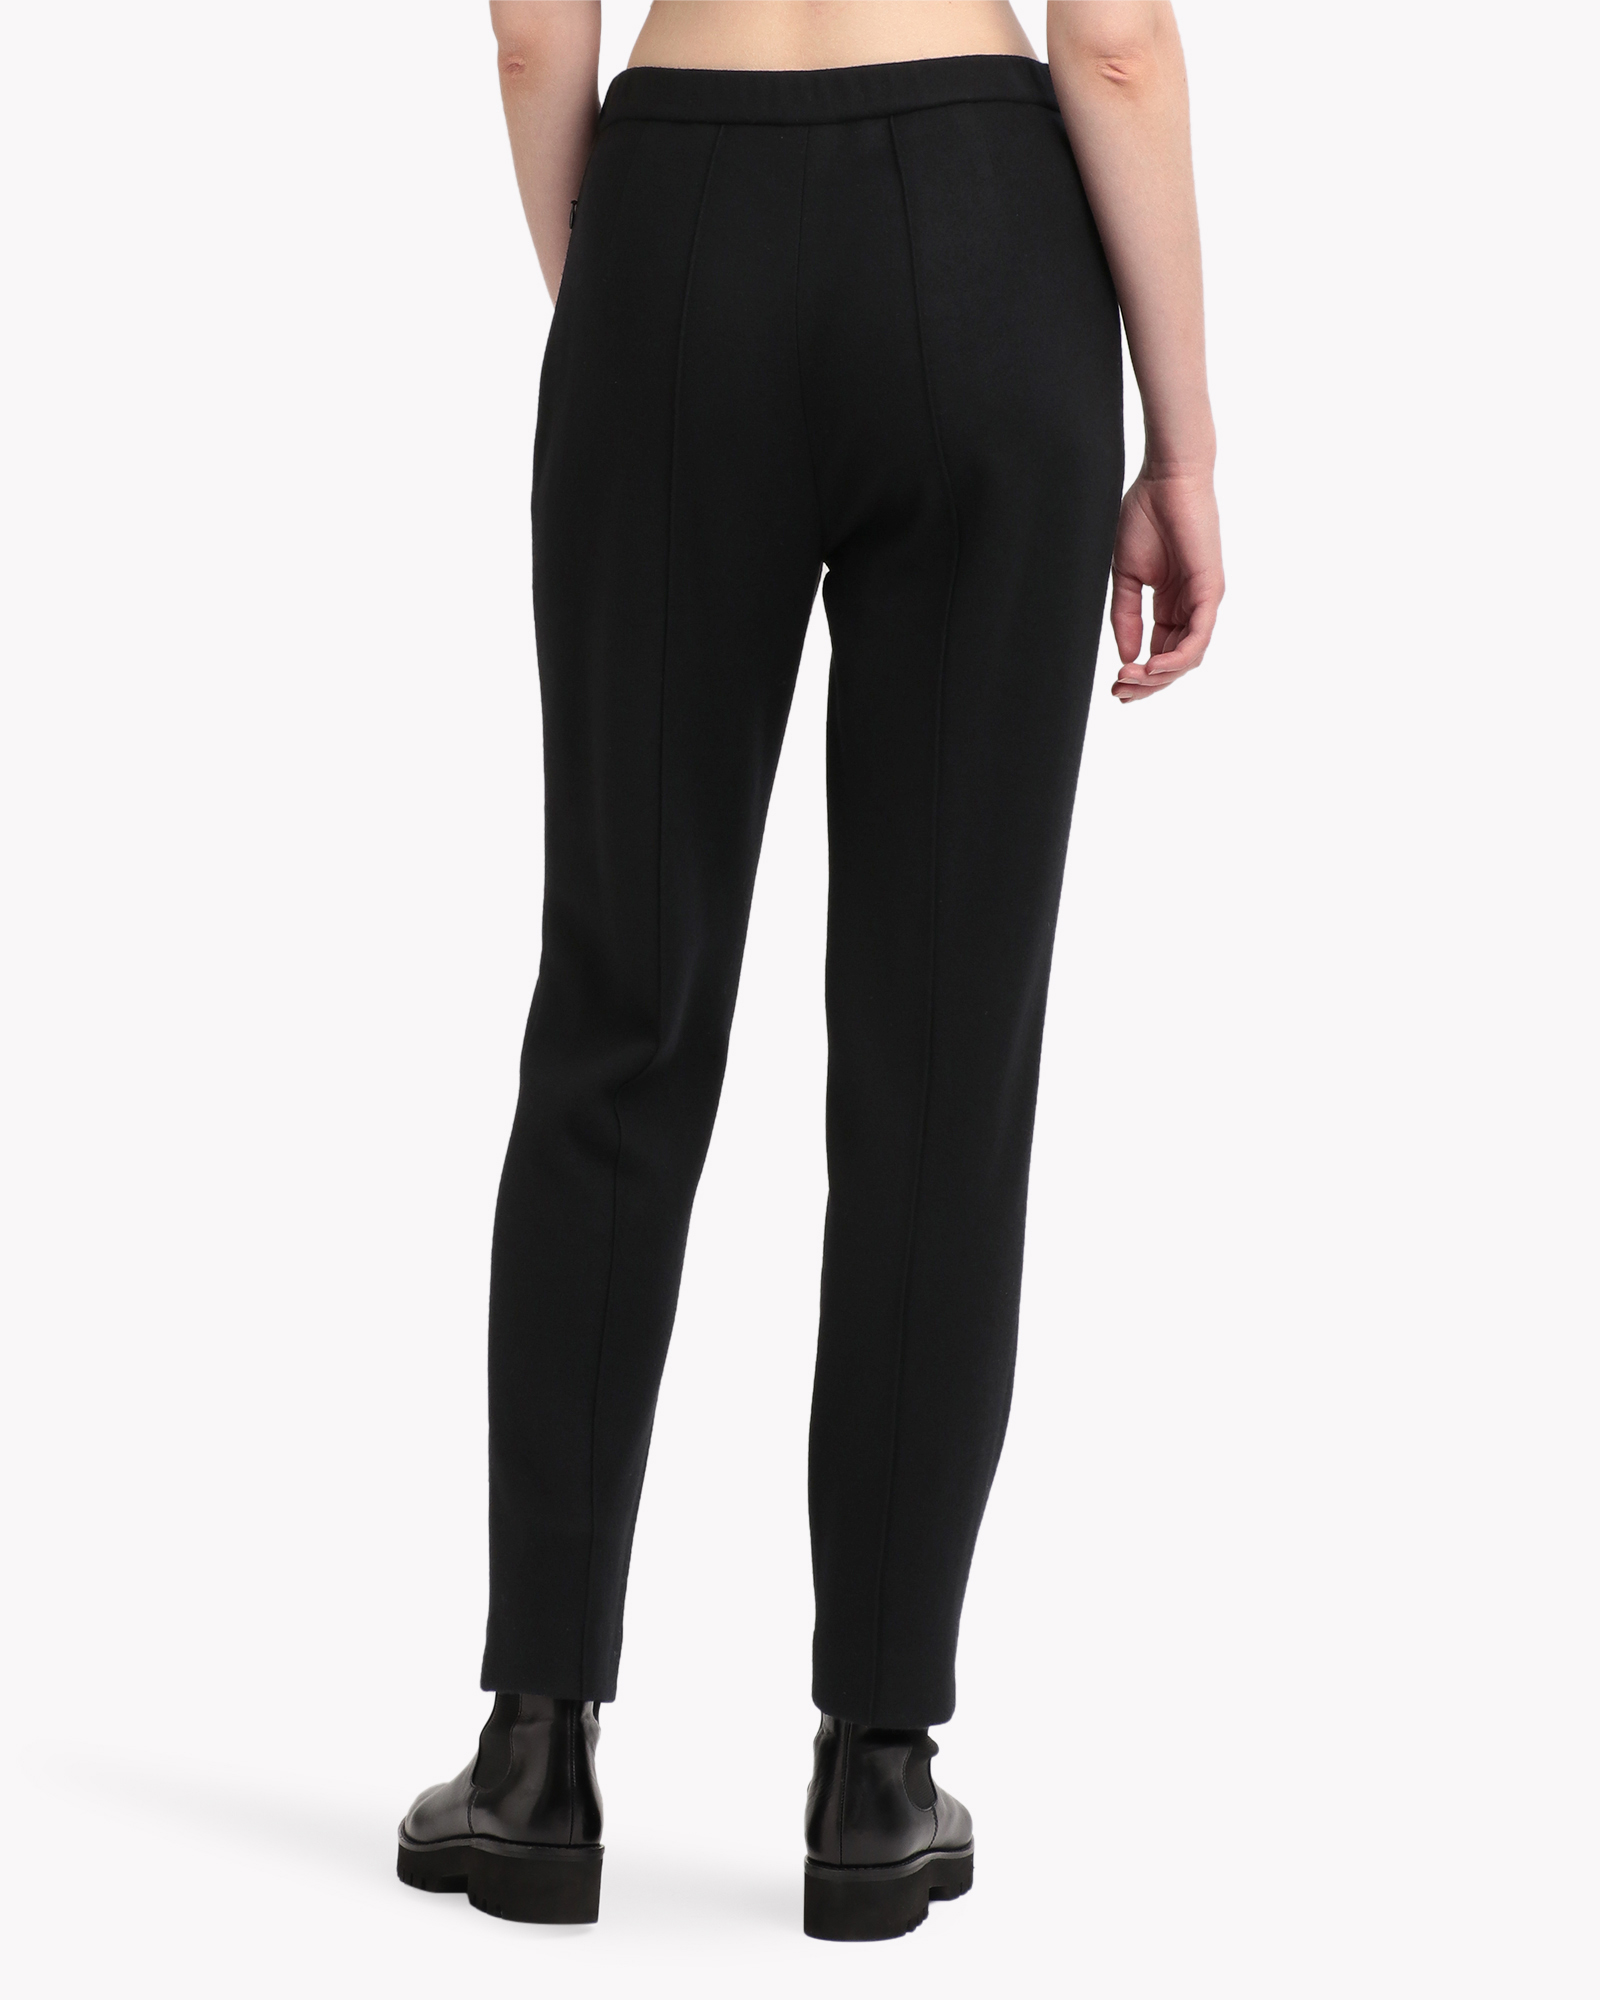 New Smooth Jersey Waist Pant PL